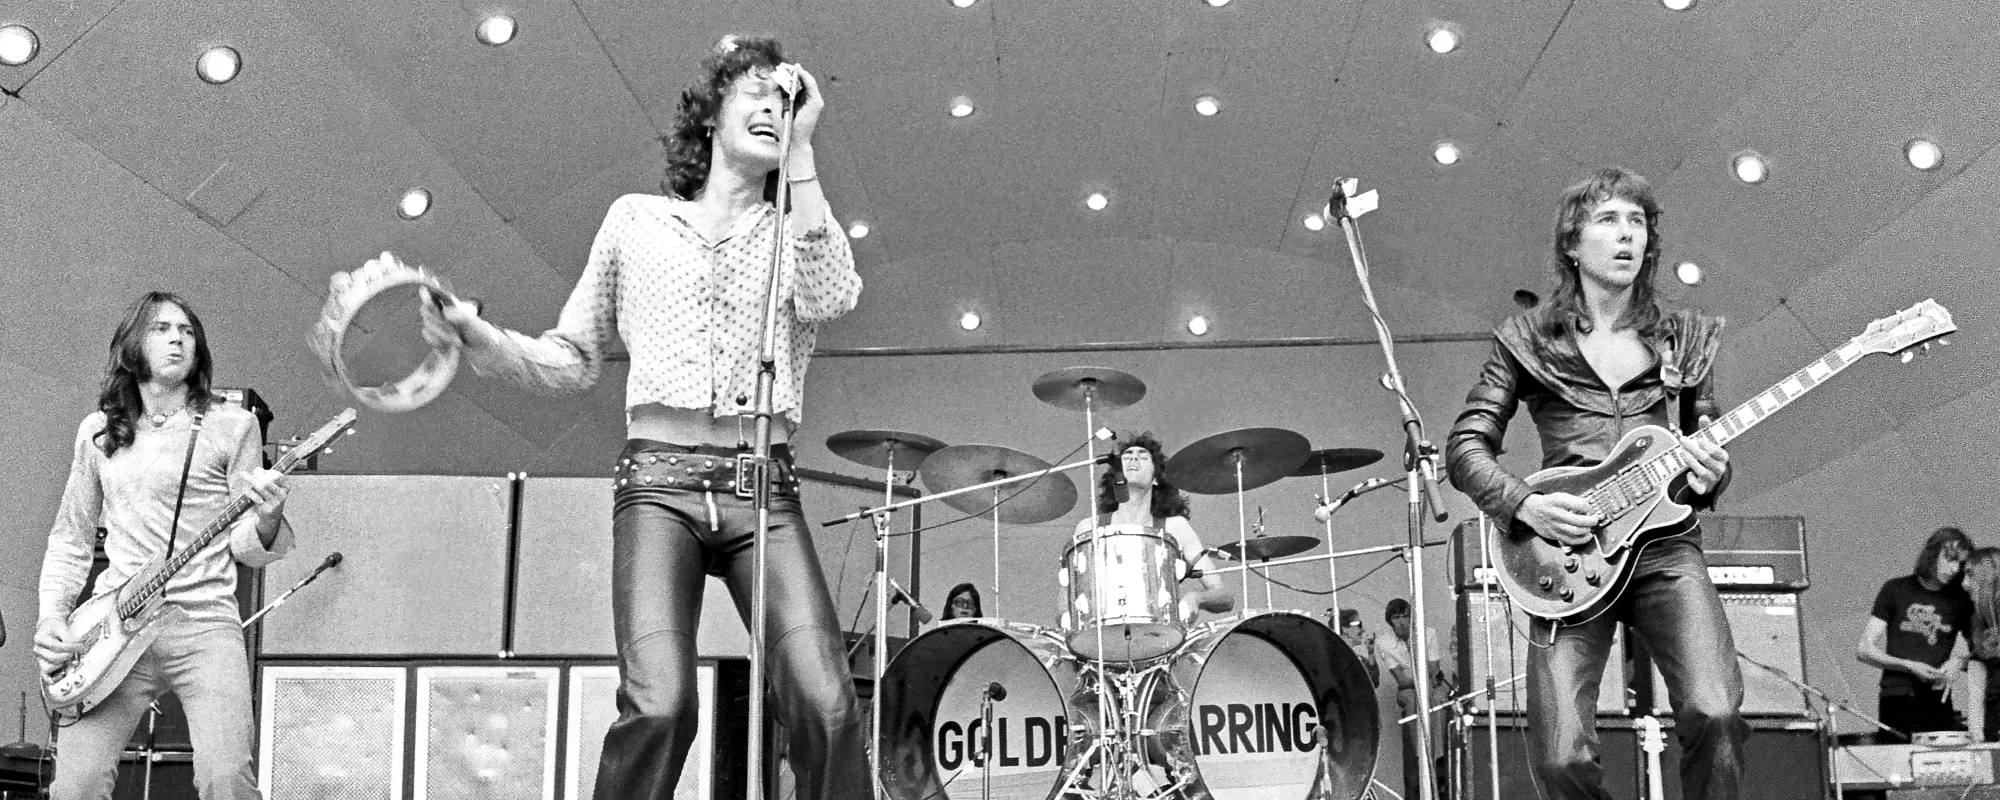 Behind the Band Name: Golden Earring - American Songwriter